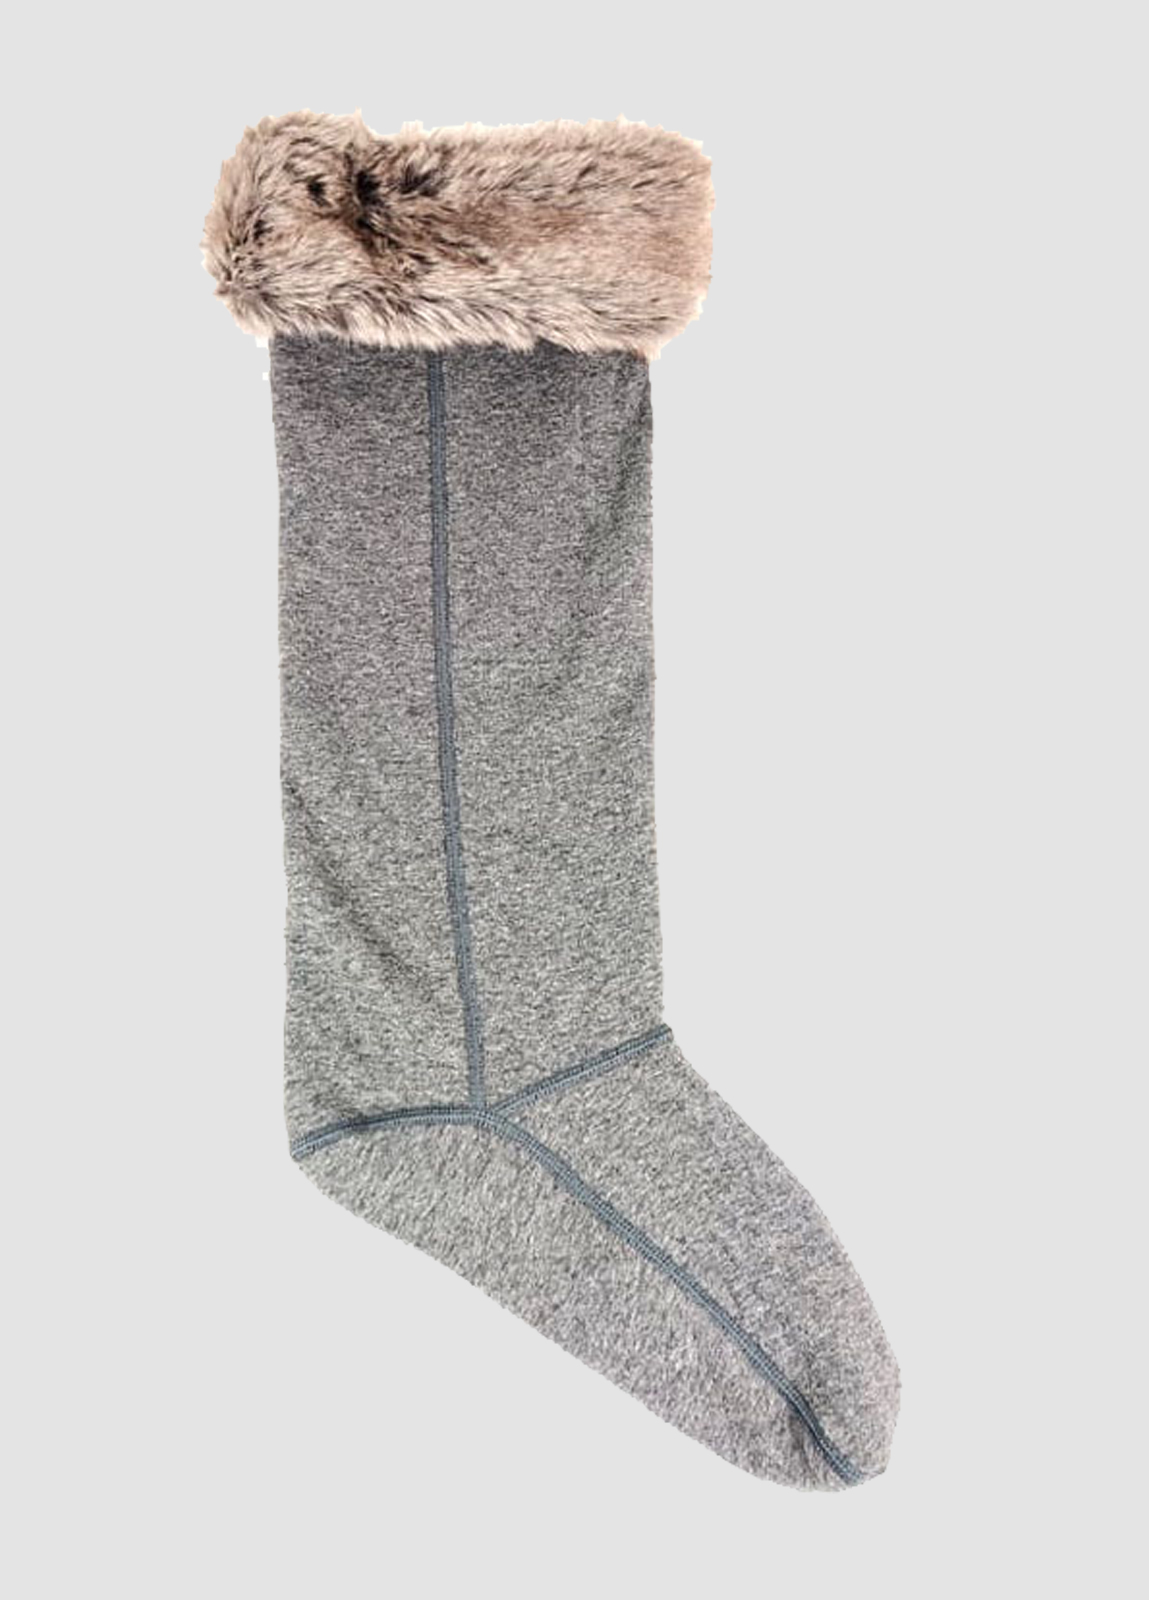 Raftery Faux Fur Boot Liners - Elk